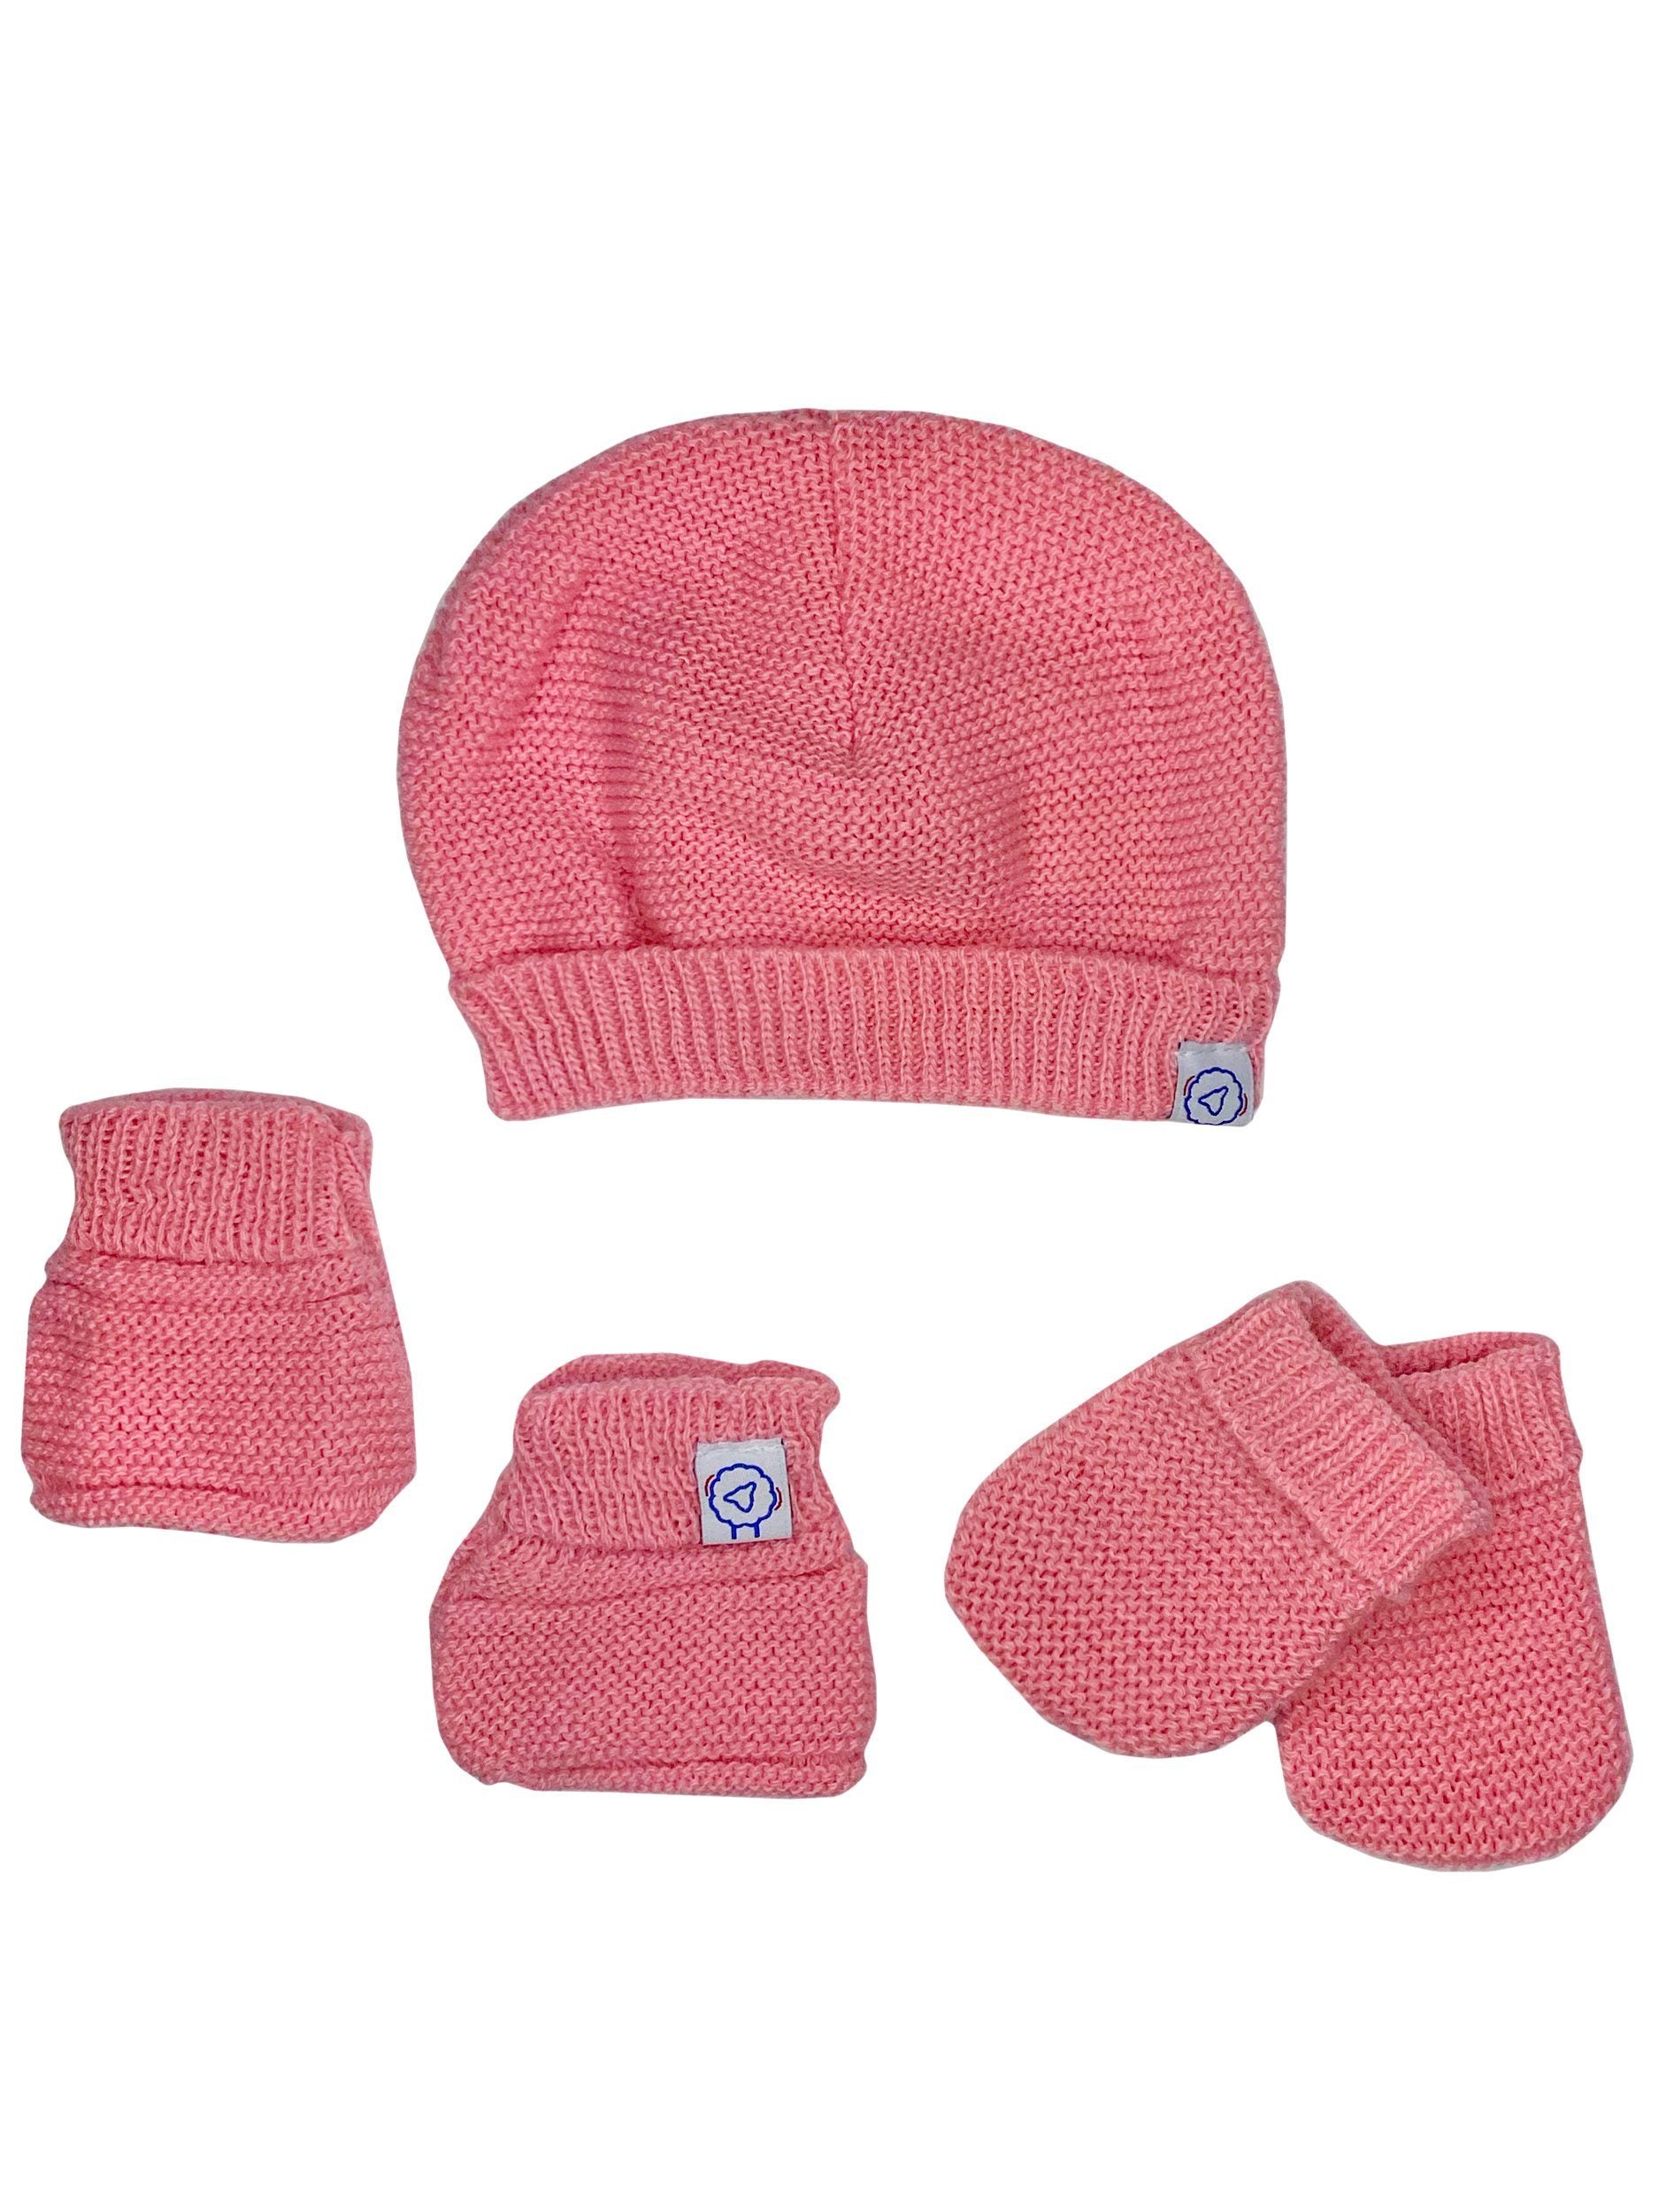 Knitted Hat, Mittens & Booties Set - Dusty Pink Hat, Mitts & Booties Set La Manufacture de Layette 